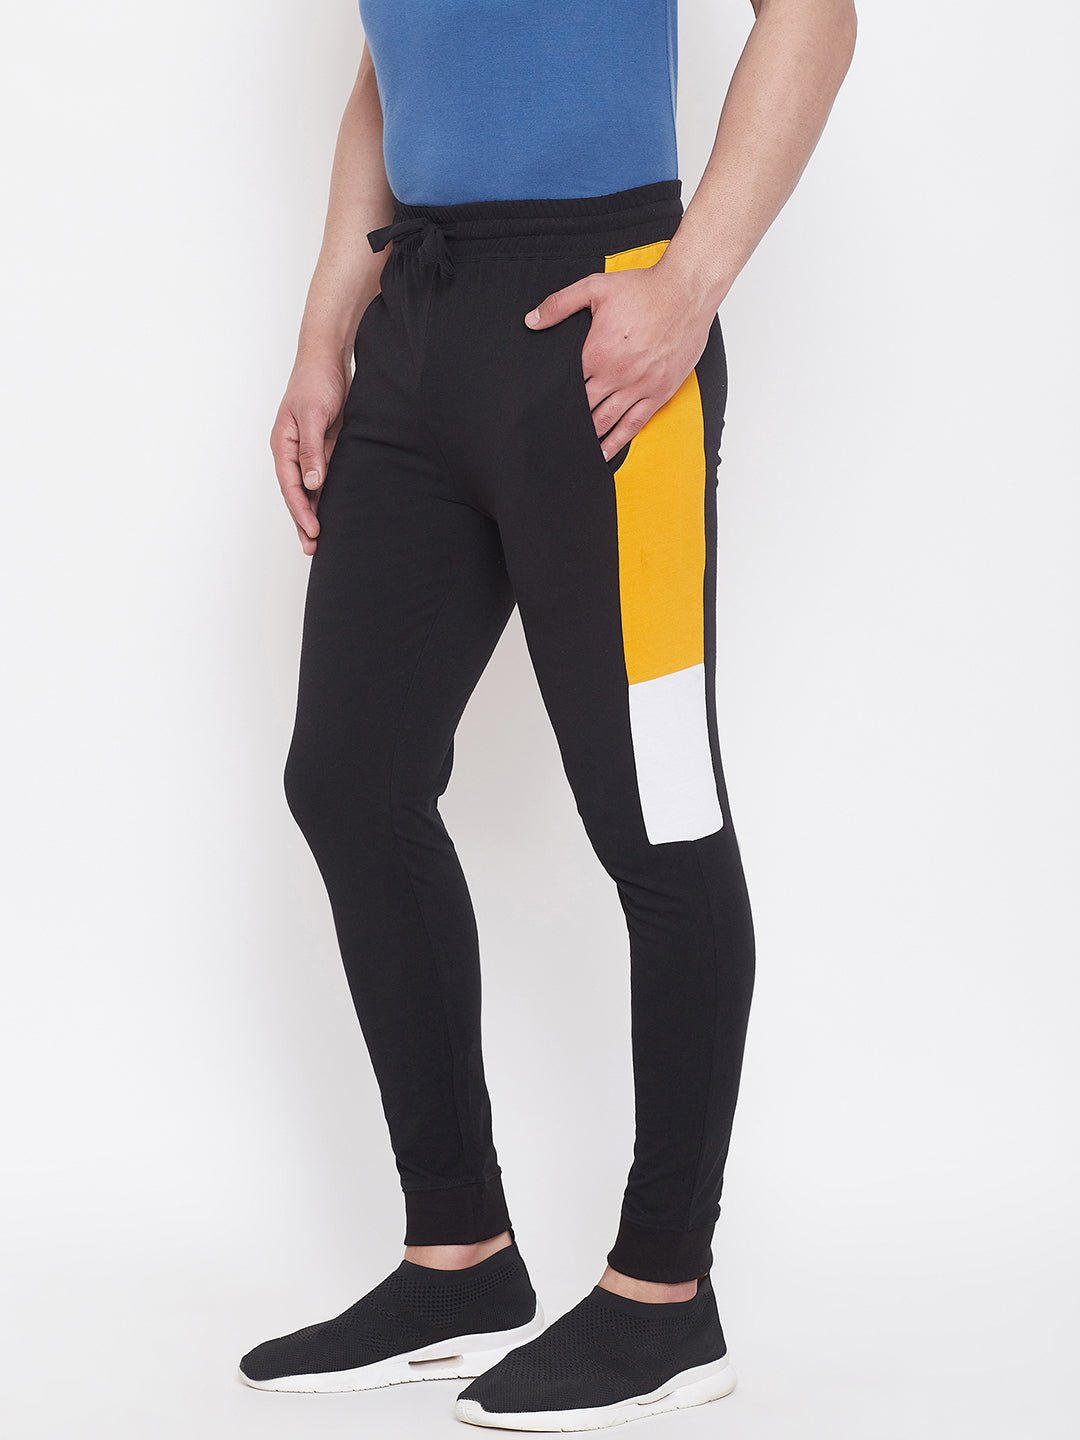 Black/Yellow/White Mid - Rise Slim Fit Joggers With Color Block